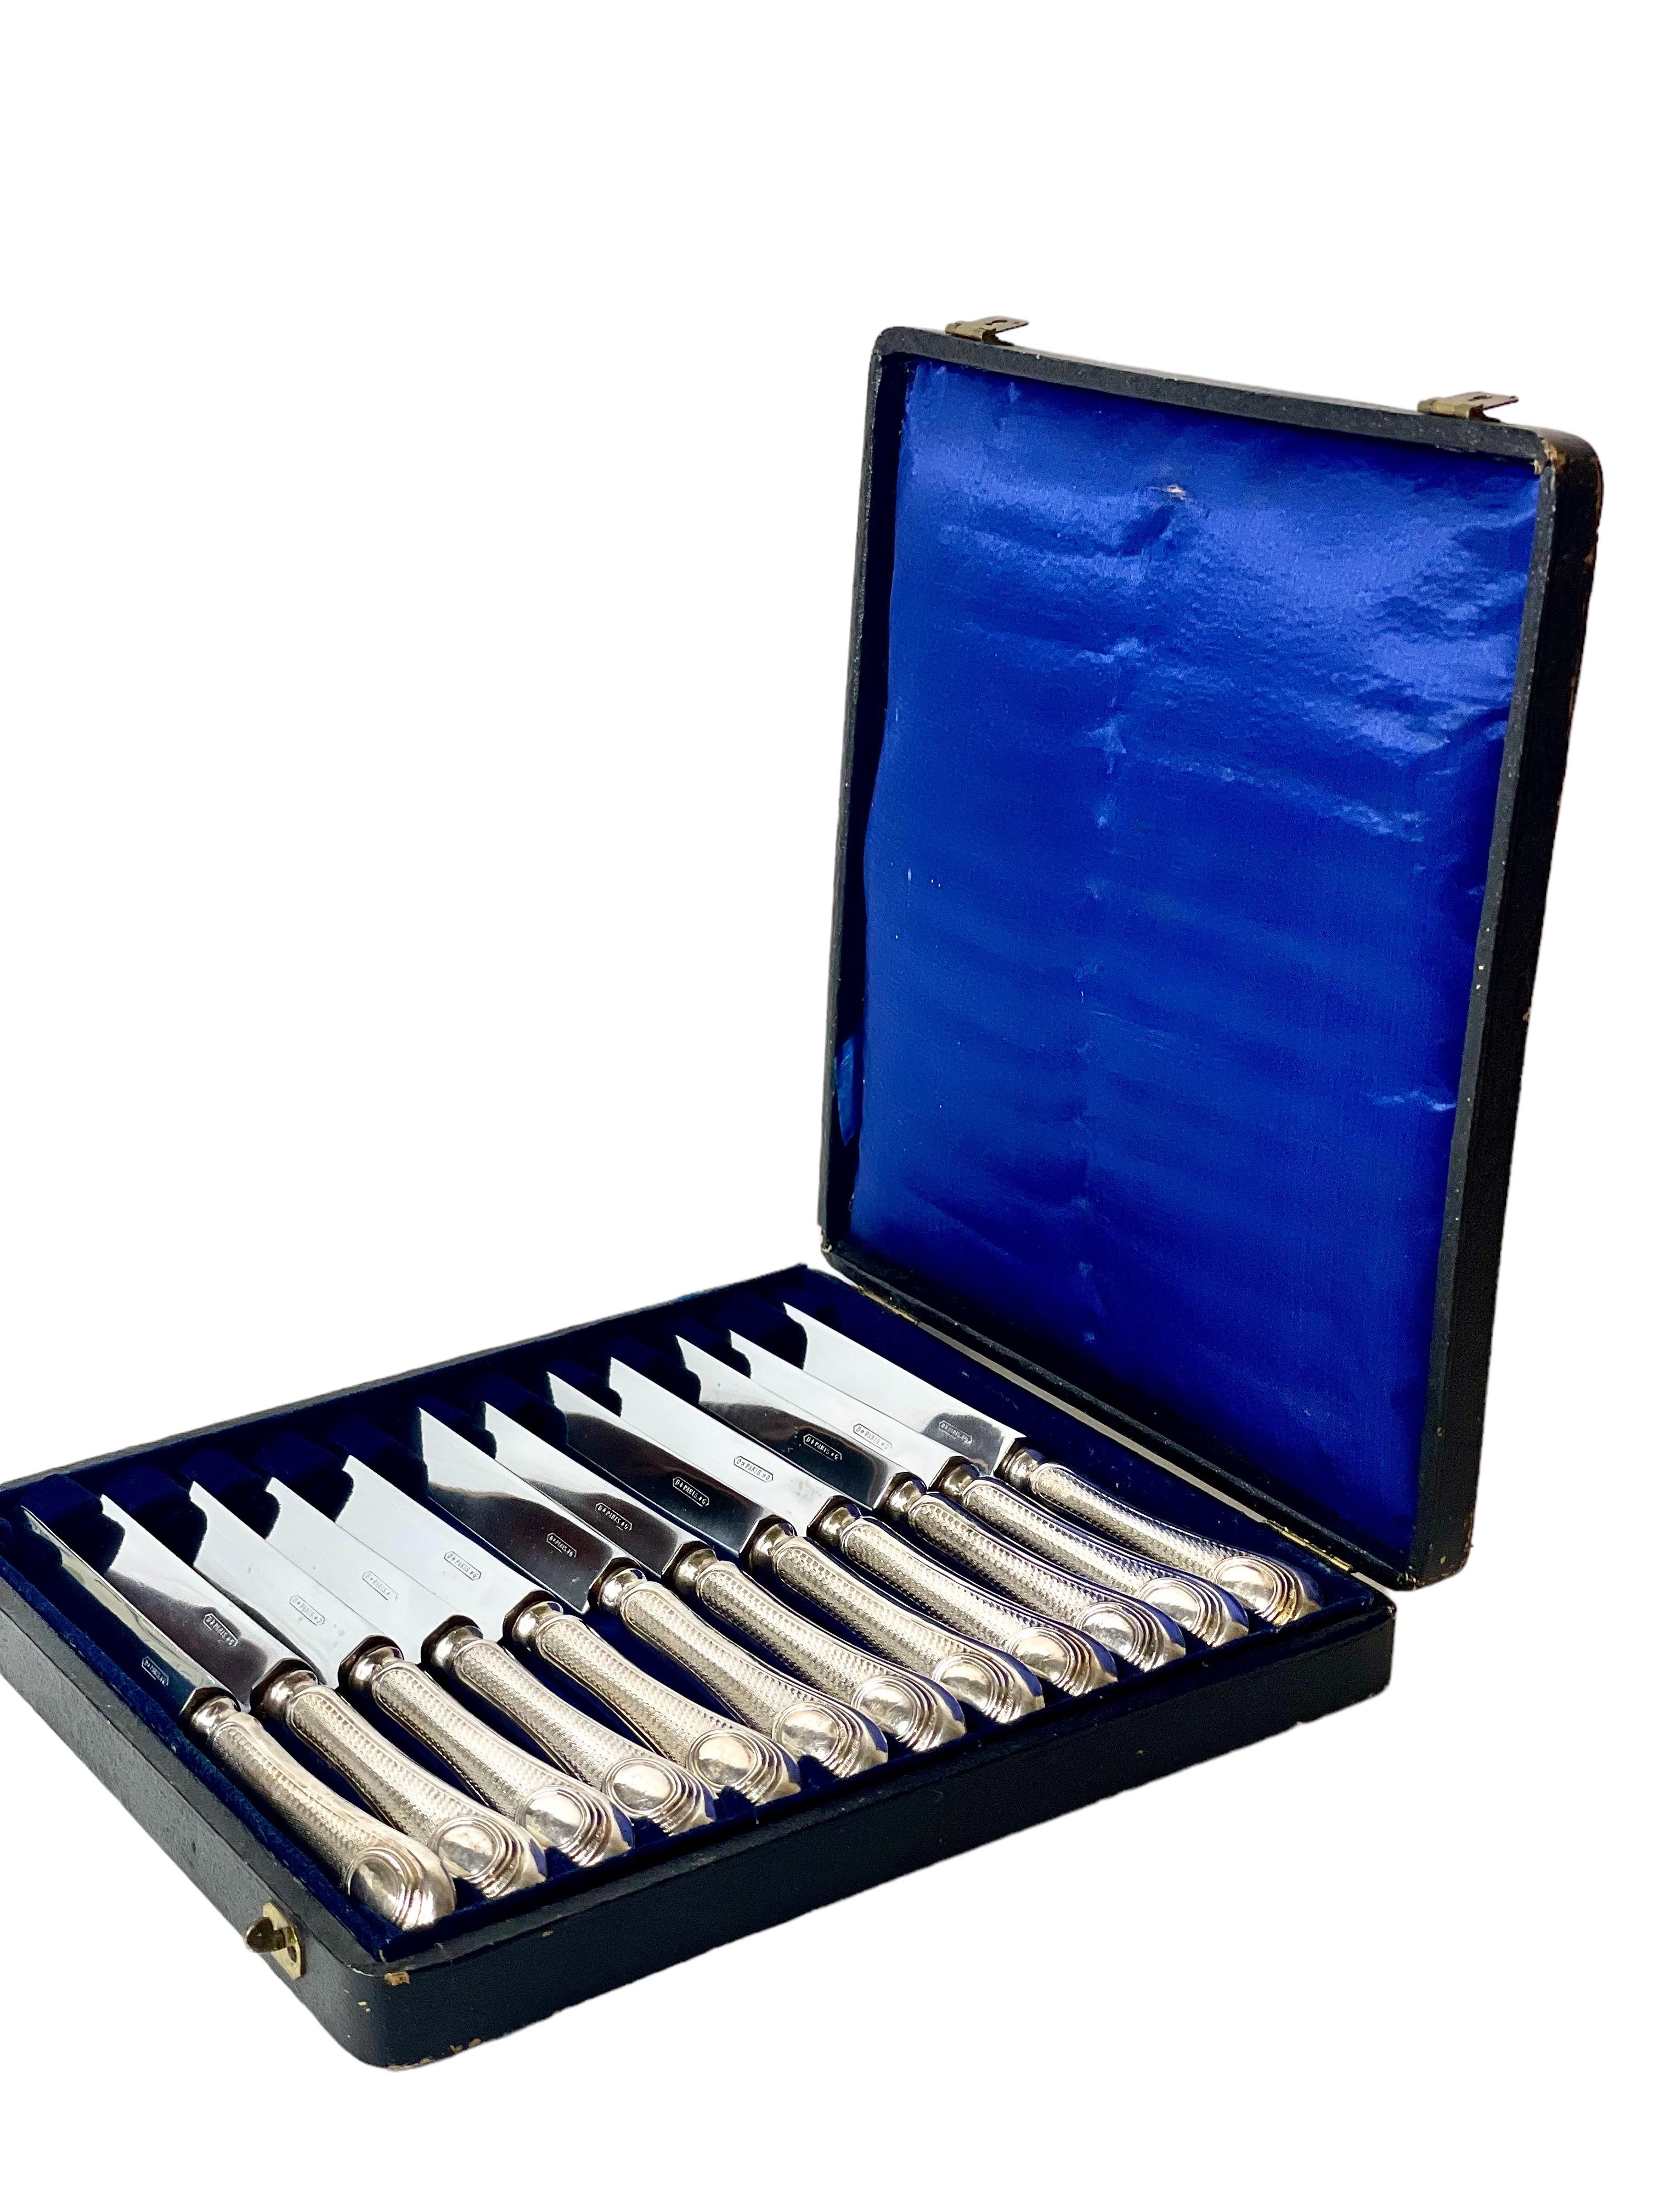 A set of twelve antique sterling silver 'Entremet' knives, the blades hallmarked with the 950/100 Minerva head stamp and offered in their original blue silk-lined presentation case. The handles are silver mounted, and feature an intricate